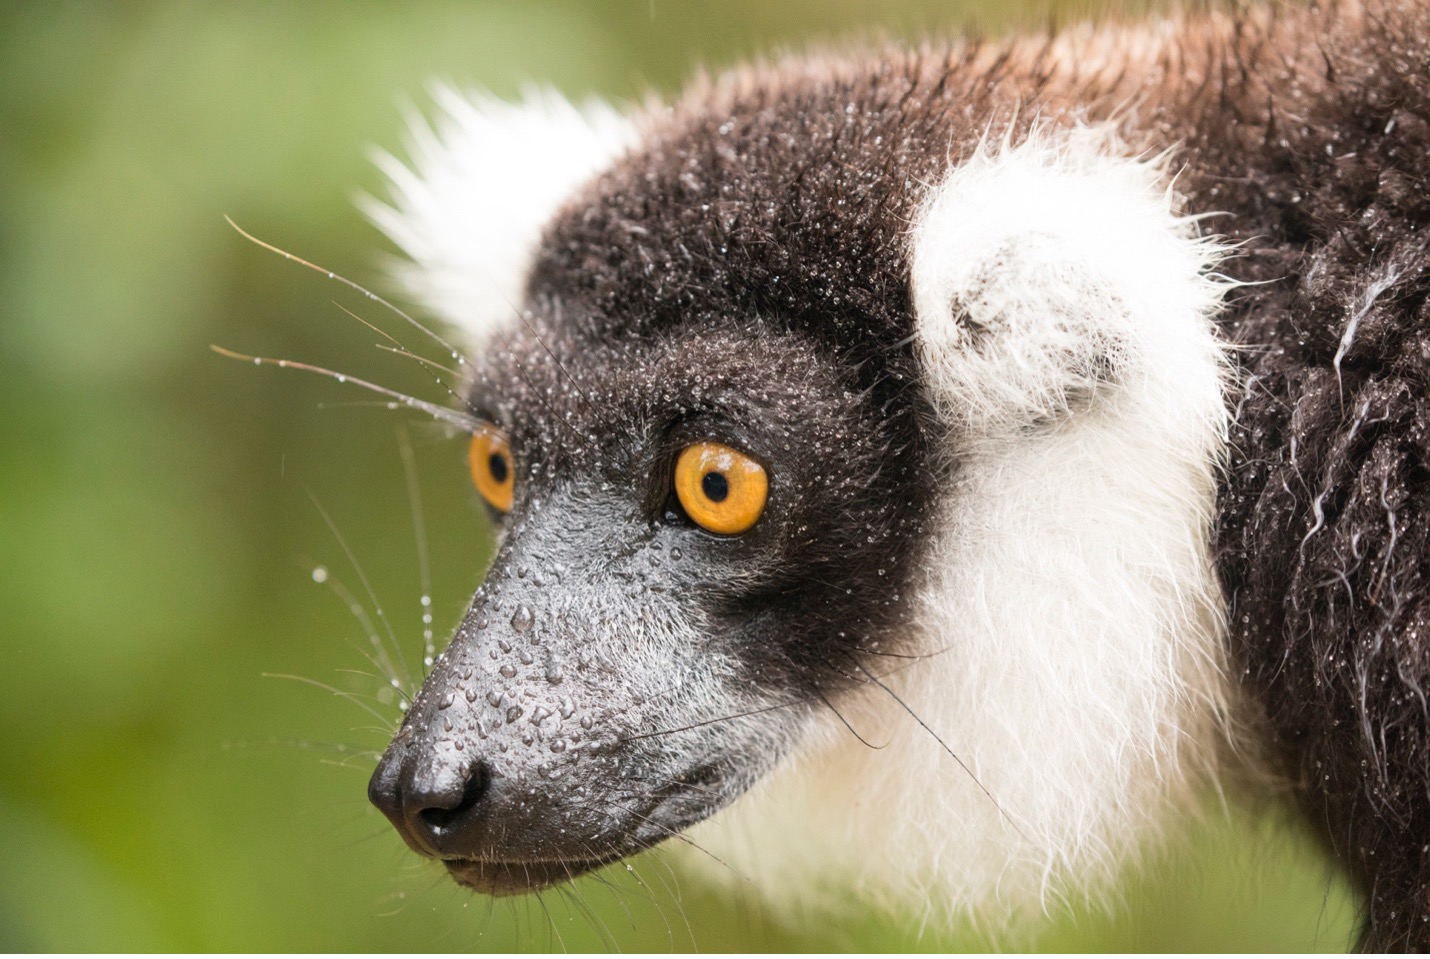 a lemur's face is entirely in focus